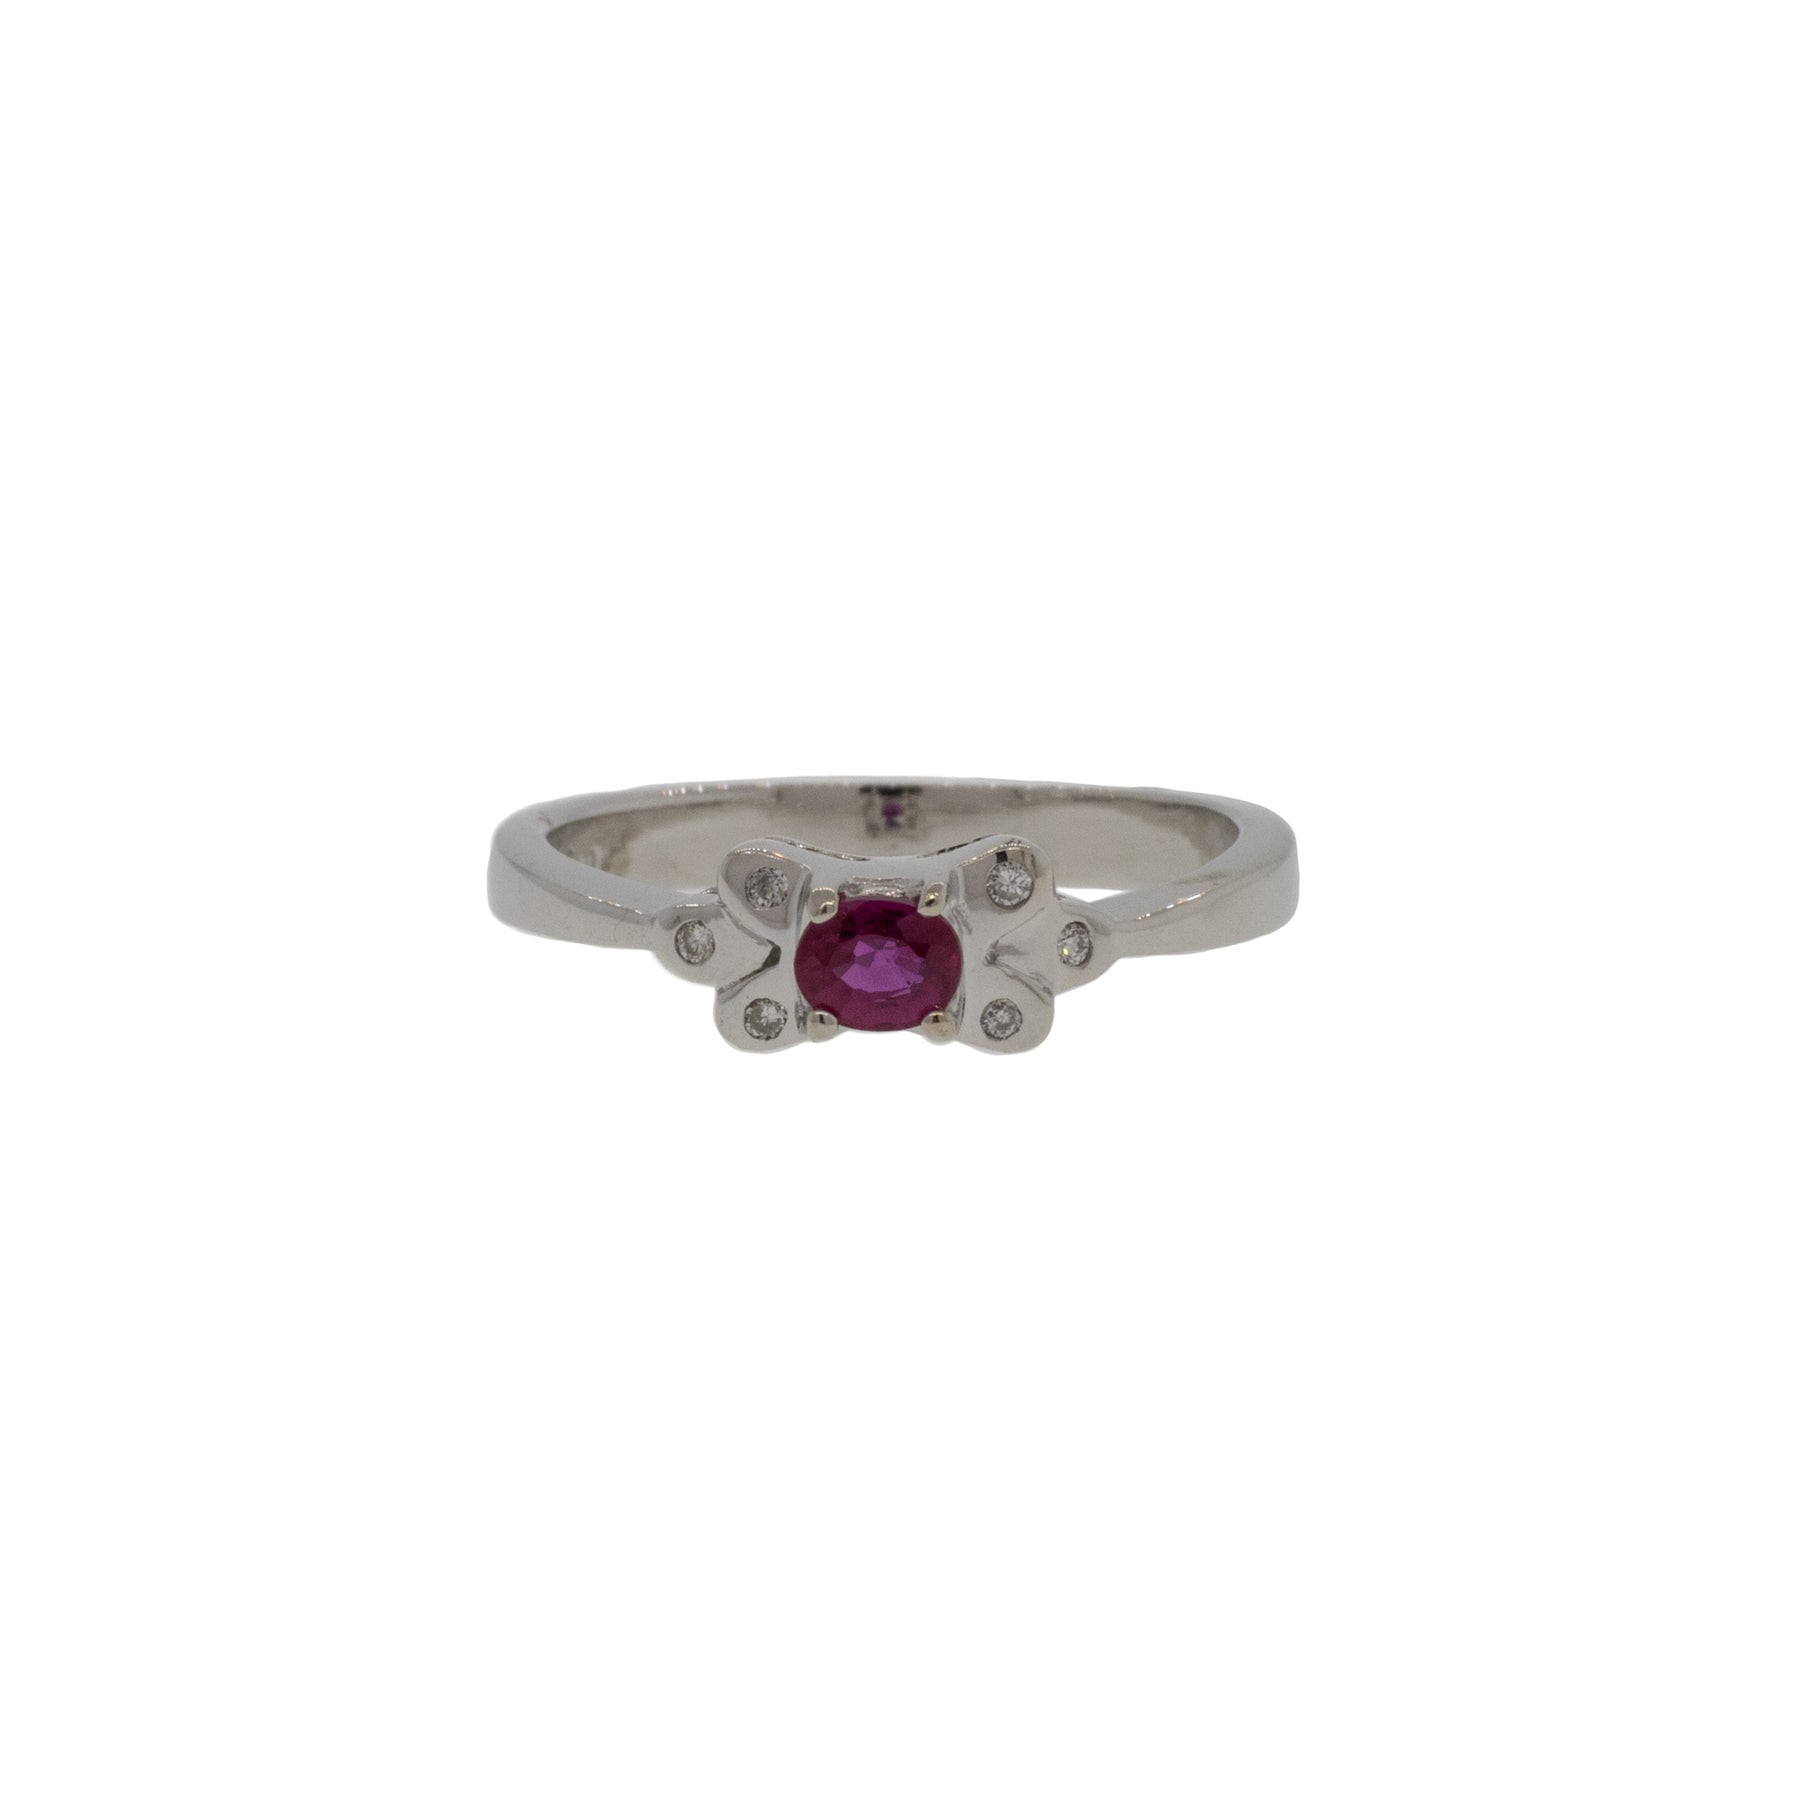 Natural East/West Oval Ruby and Diamond Ring